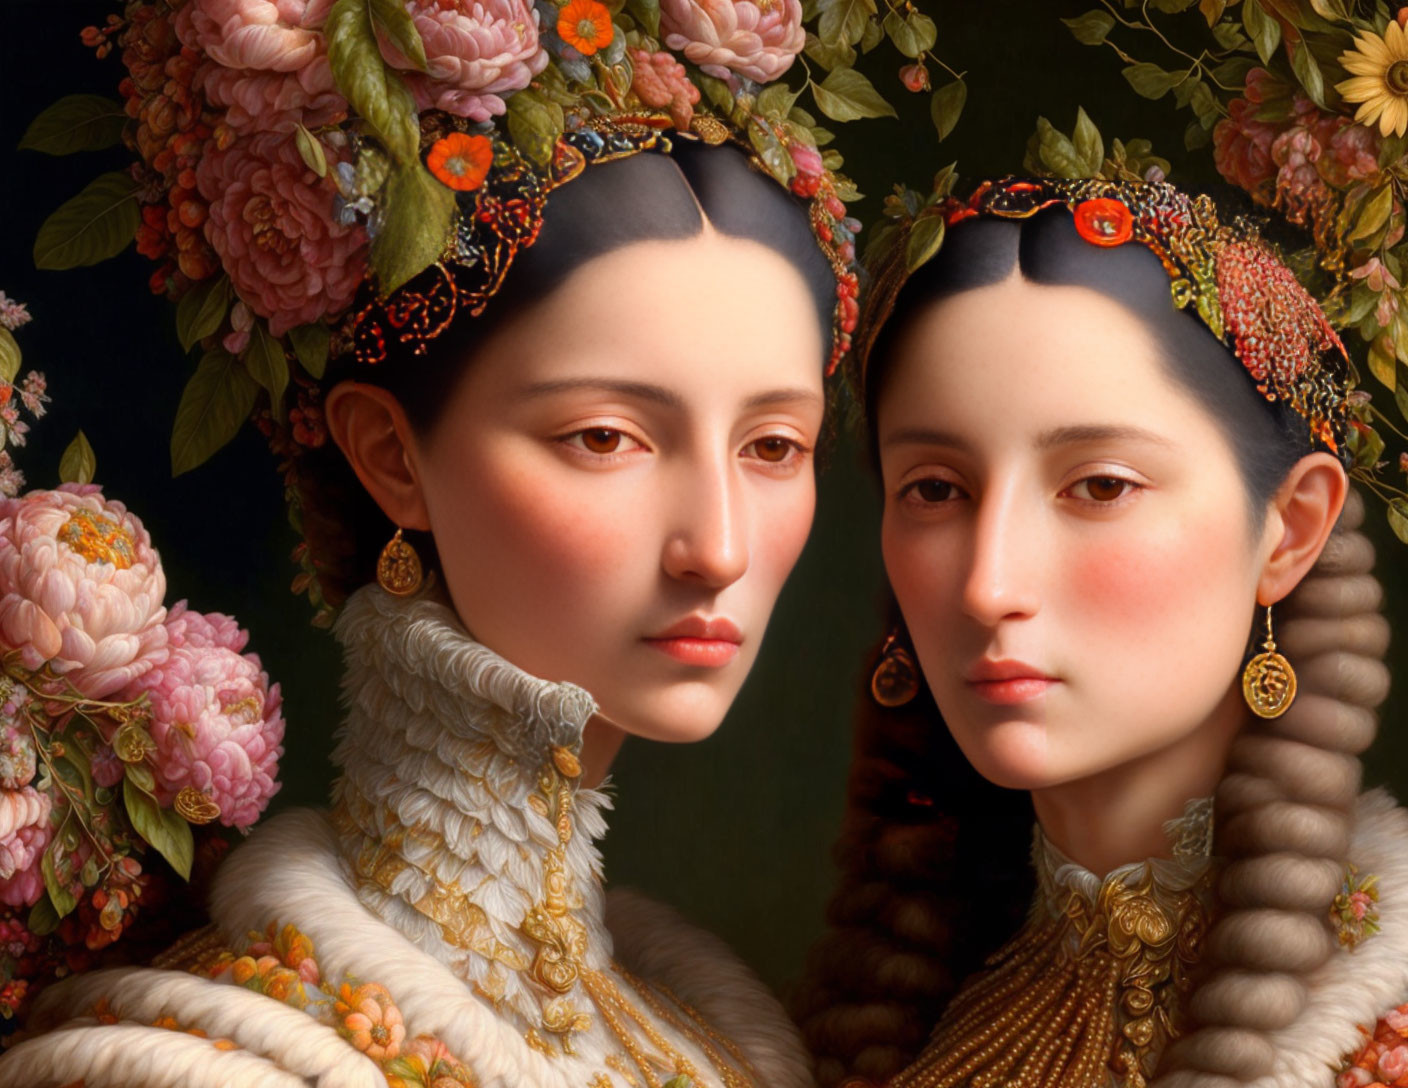 Two Women in Ornate Floral Headdresses and Traditional Clothing